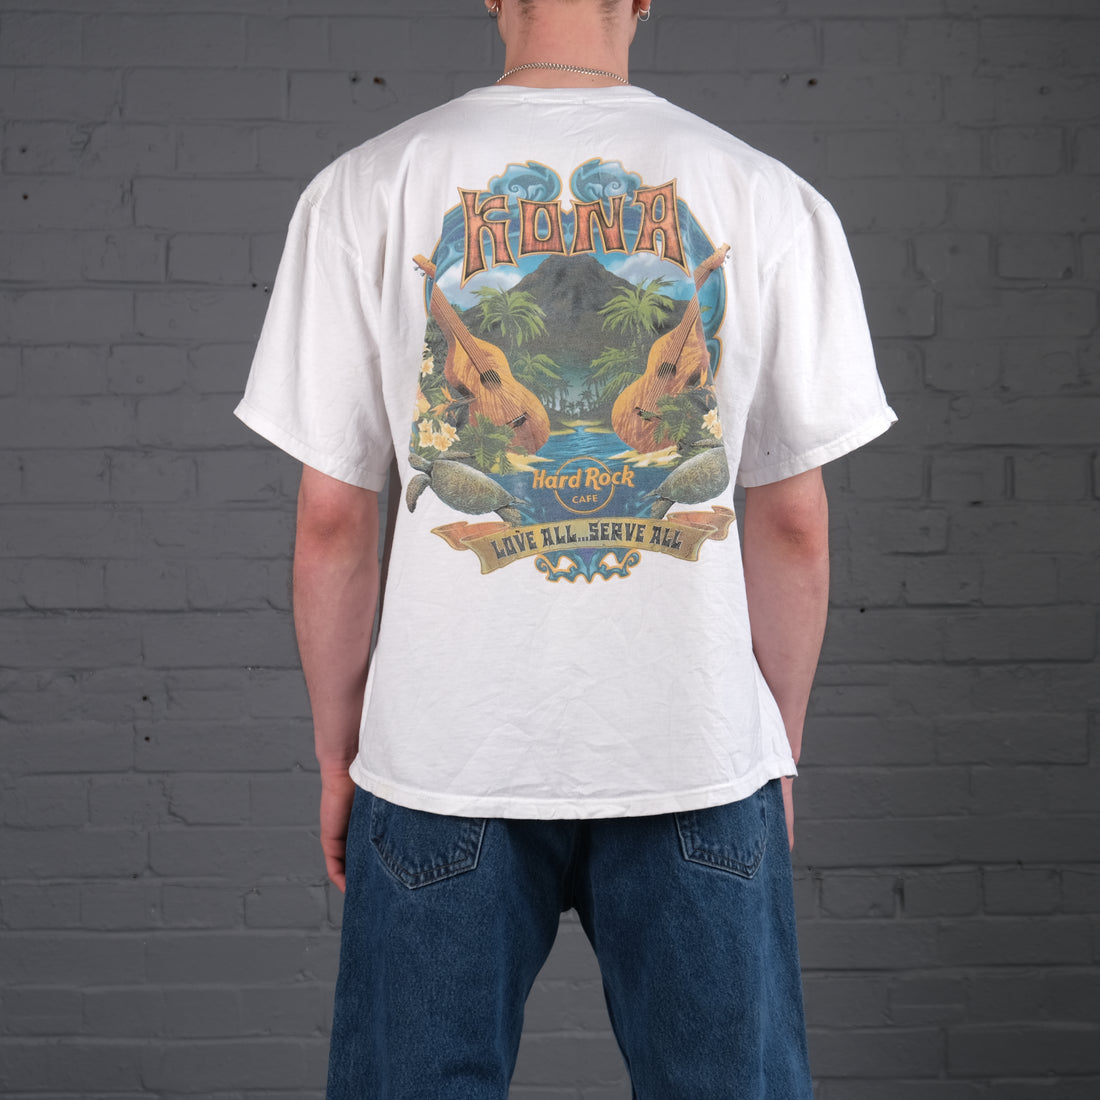 Vintage Hard Rock Cafe graphic t-shirt in White